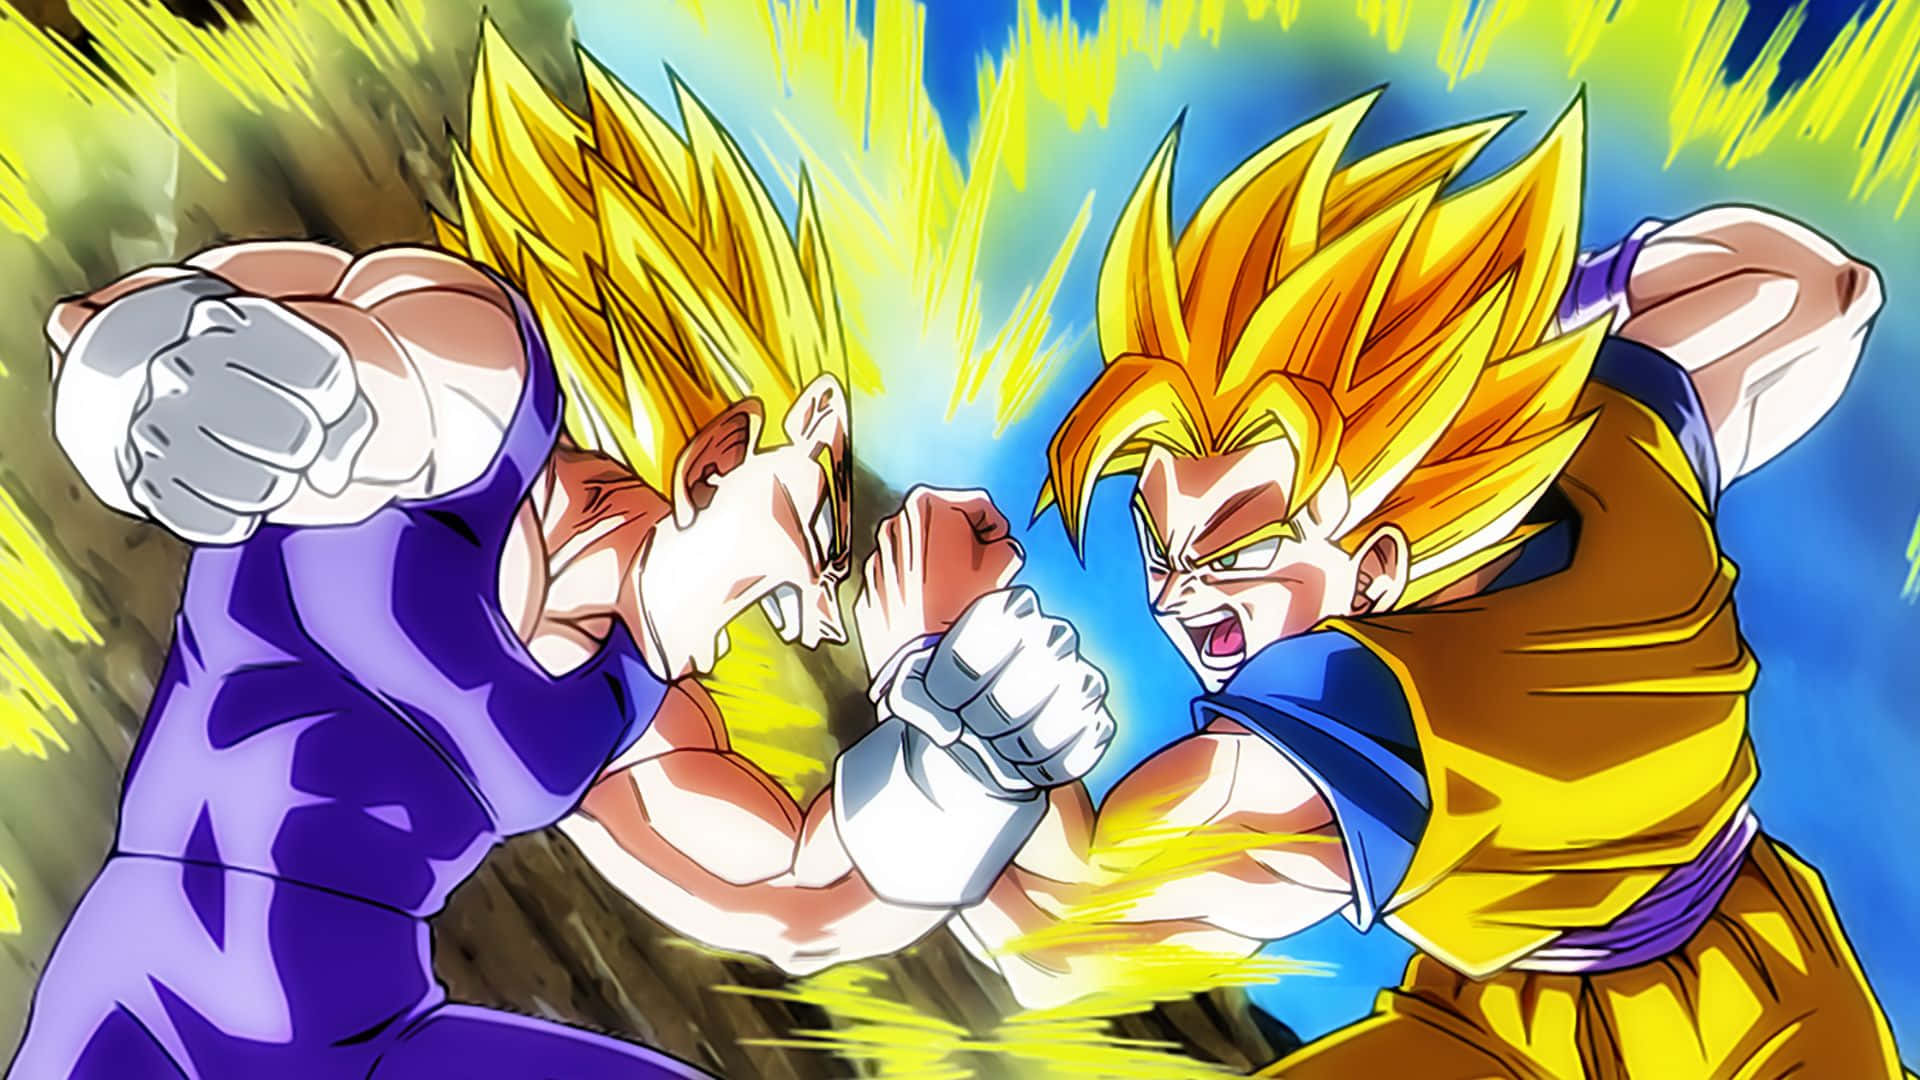 An epic battle from the Dragon Ball Z series